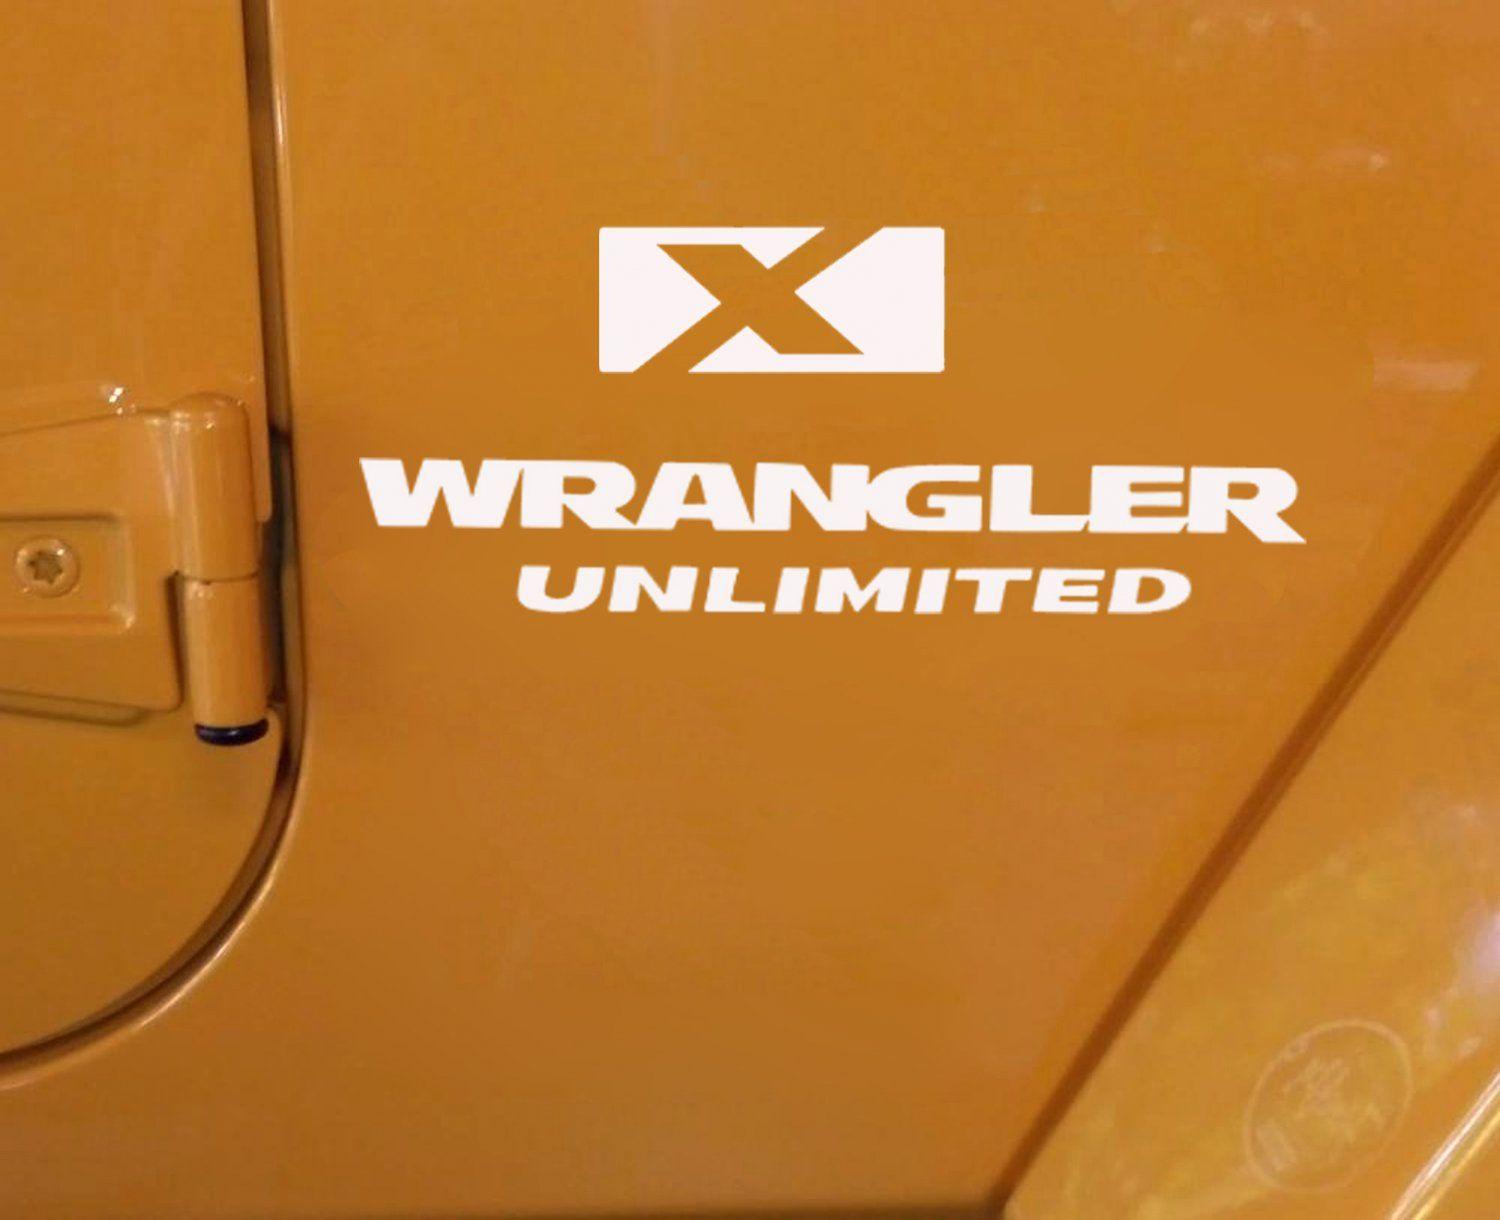 Jeep Wrangler X Logo - 2 of Jeep wrangler unlimited X Decal Stickers Logo white color